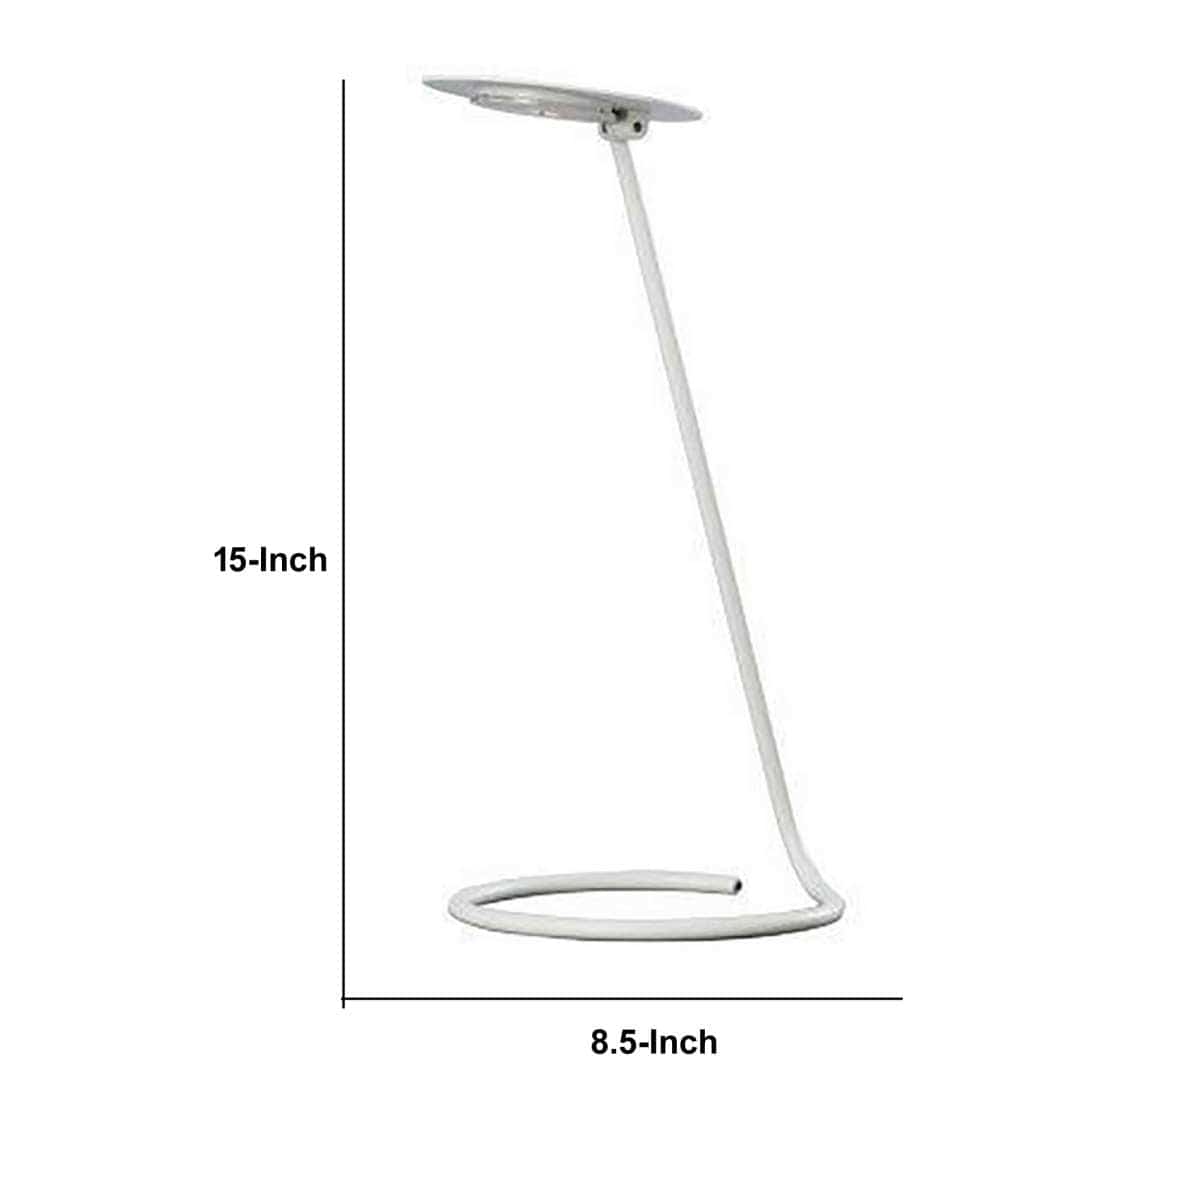 Benzara Desk Lamp With Pendulum Style And Flat Saucer Shade, White By Benzara Desk Lamps BM240387